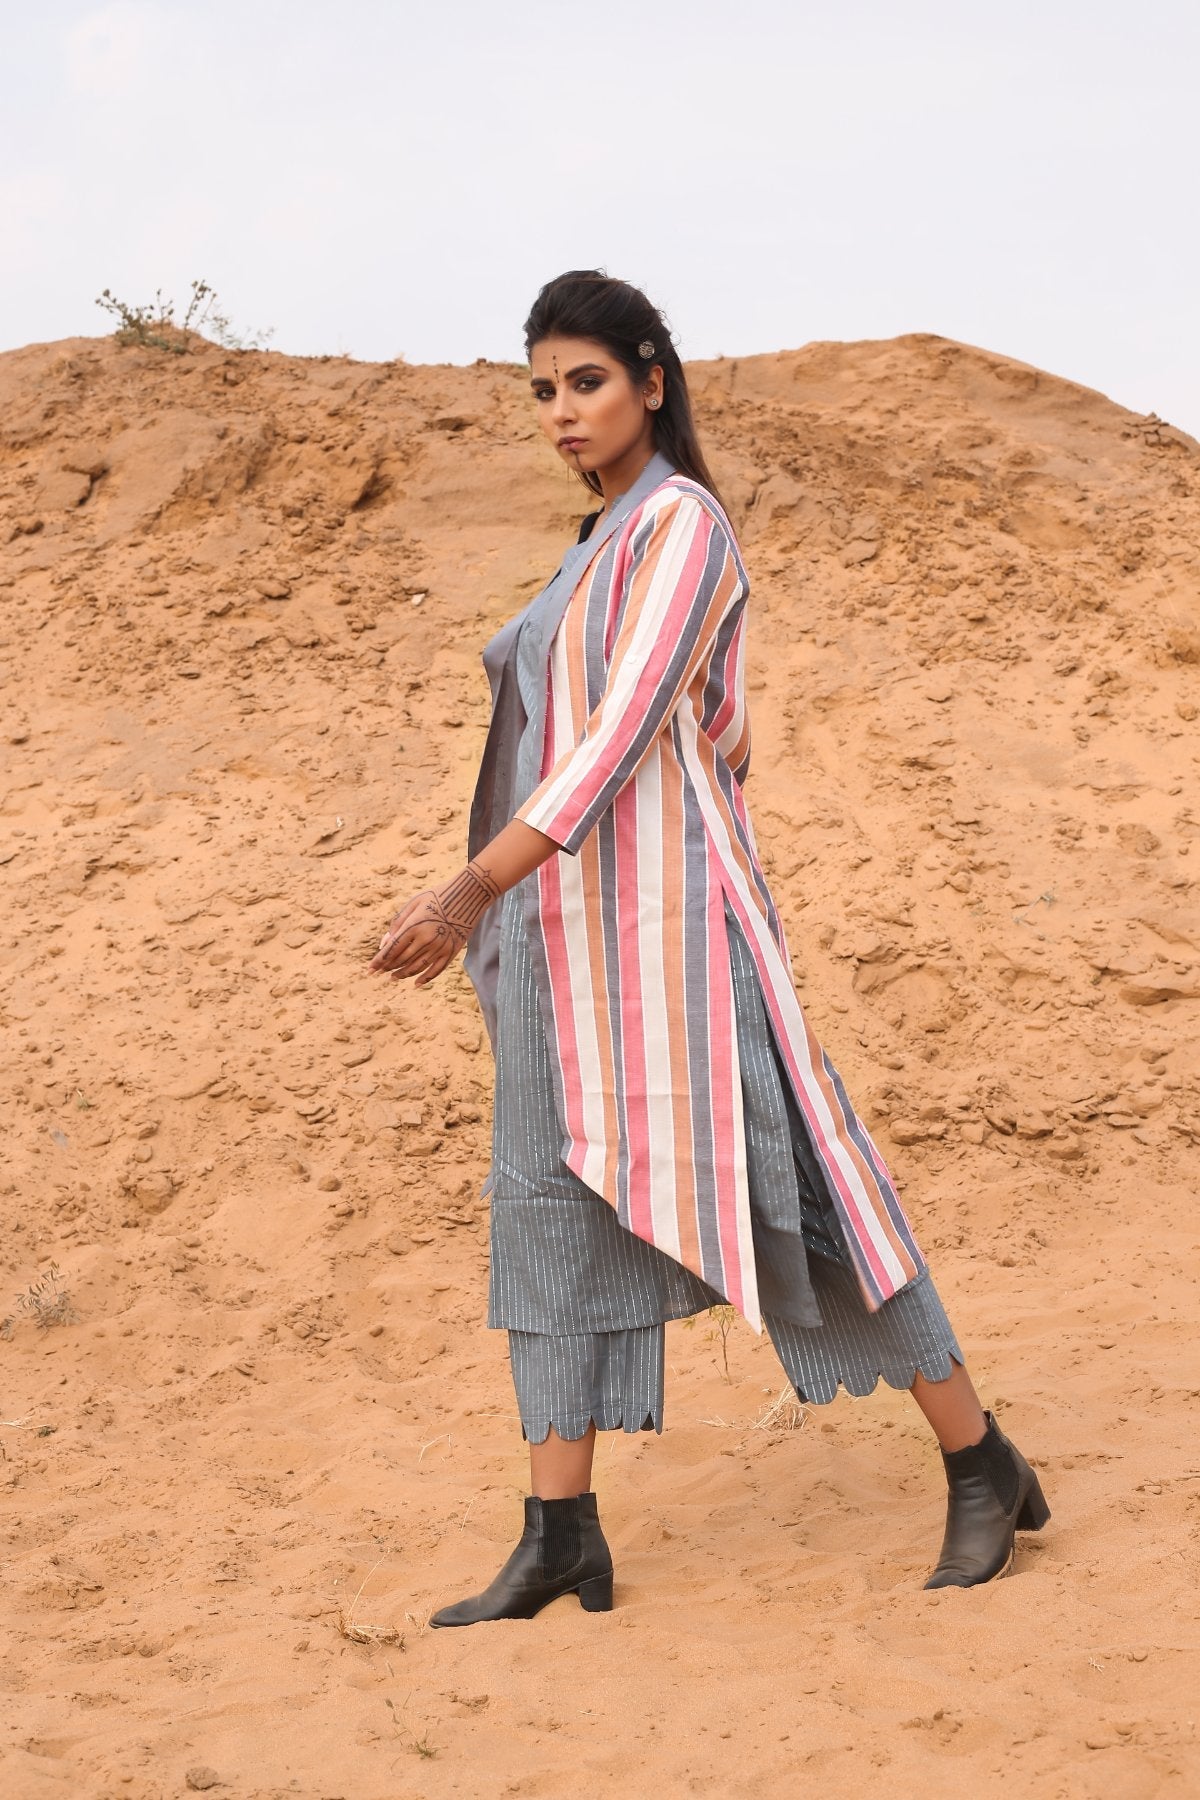 Multi-Color Striped Cape With Kurta And Pants - Set Of Three at Kamakhyaa by Keva. This item is Cape, Co-ord Sets, Cotton, Cotton Lurex, Desert Rose, Multicolor, Natural, Relaxed Fit, Resort Wear, Stripes, Travel, Travel Co-ords, Womenswear